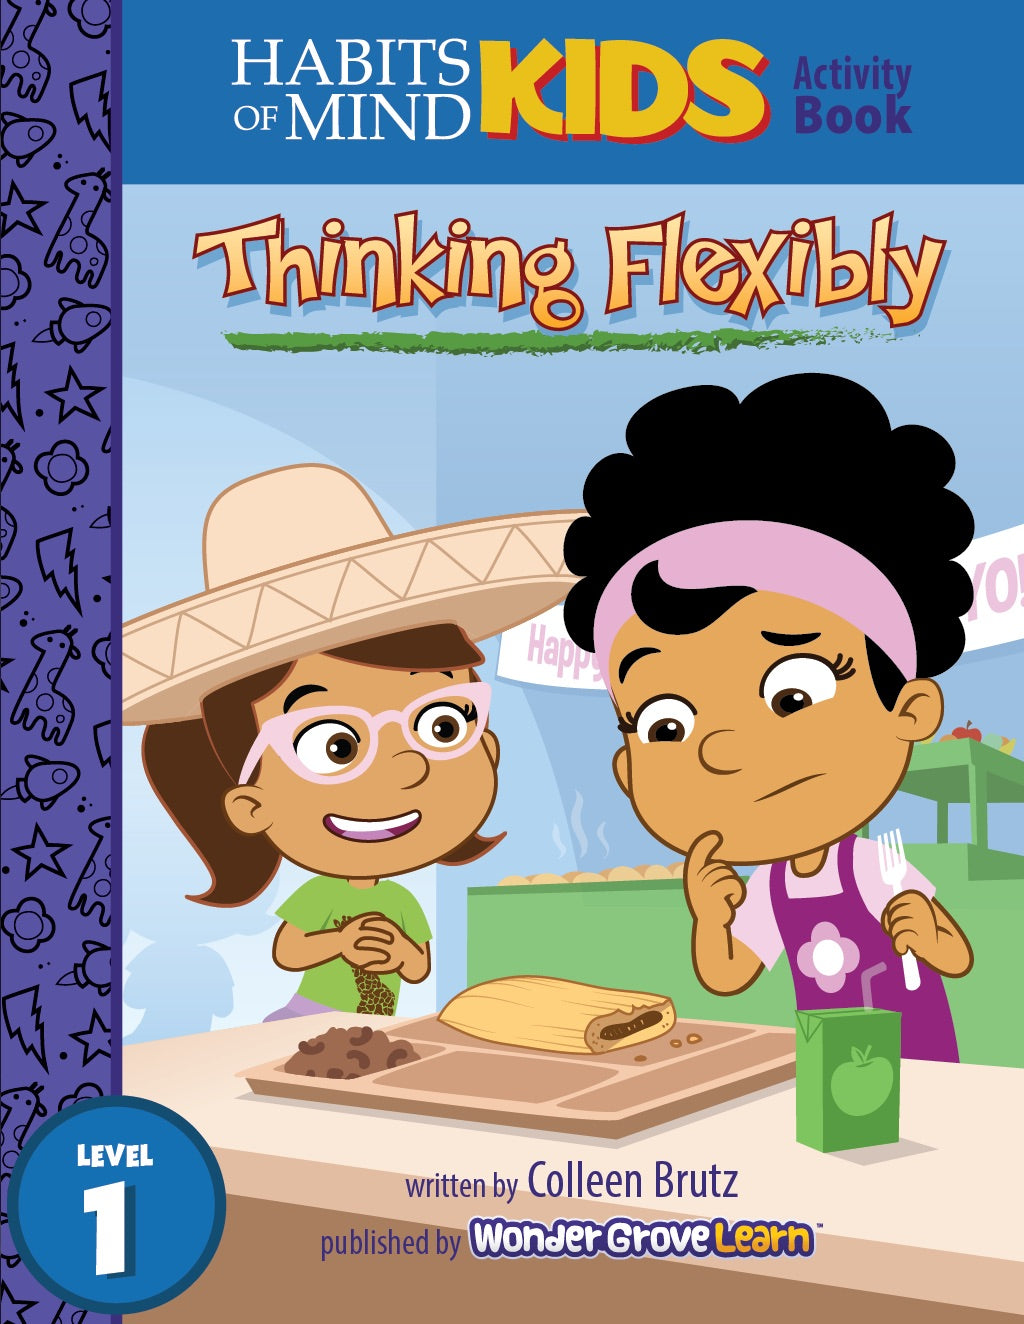 Thinking Flexibly: A Habits of Mind Story for First Grade